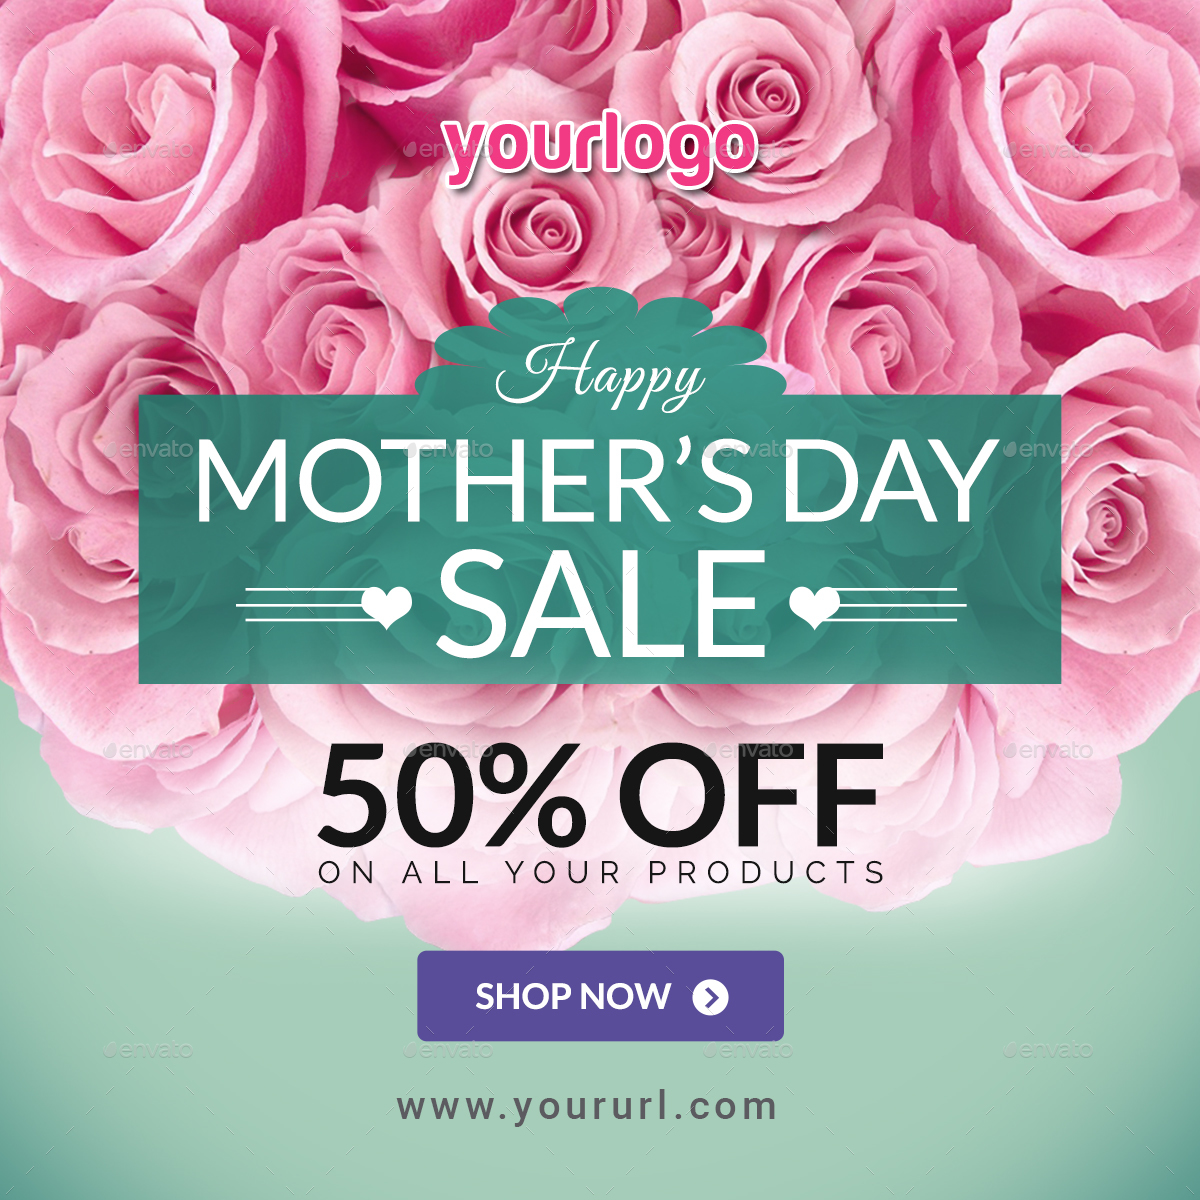 Mother's Day Sale Banners by Hyov GraphicRiver